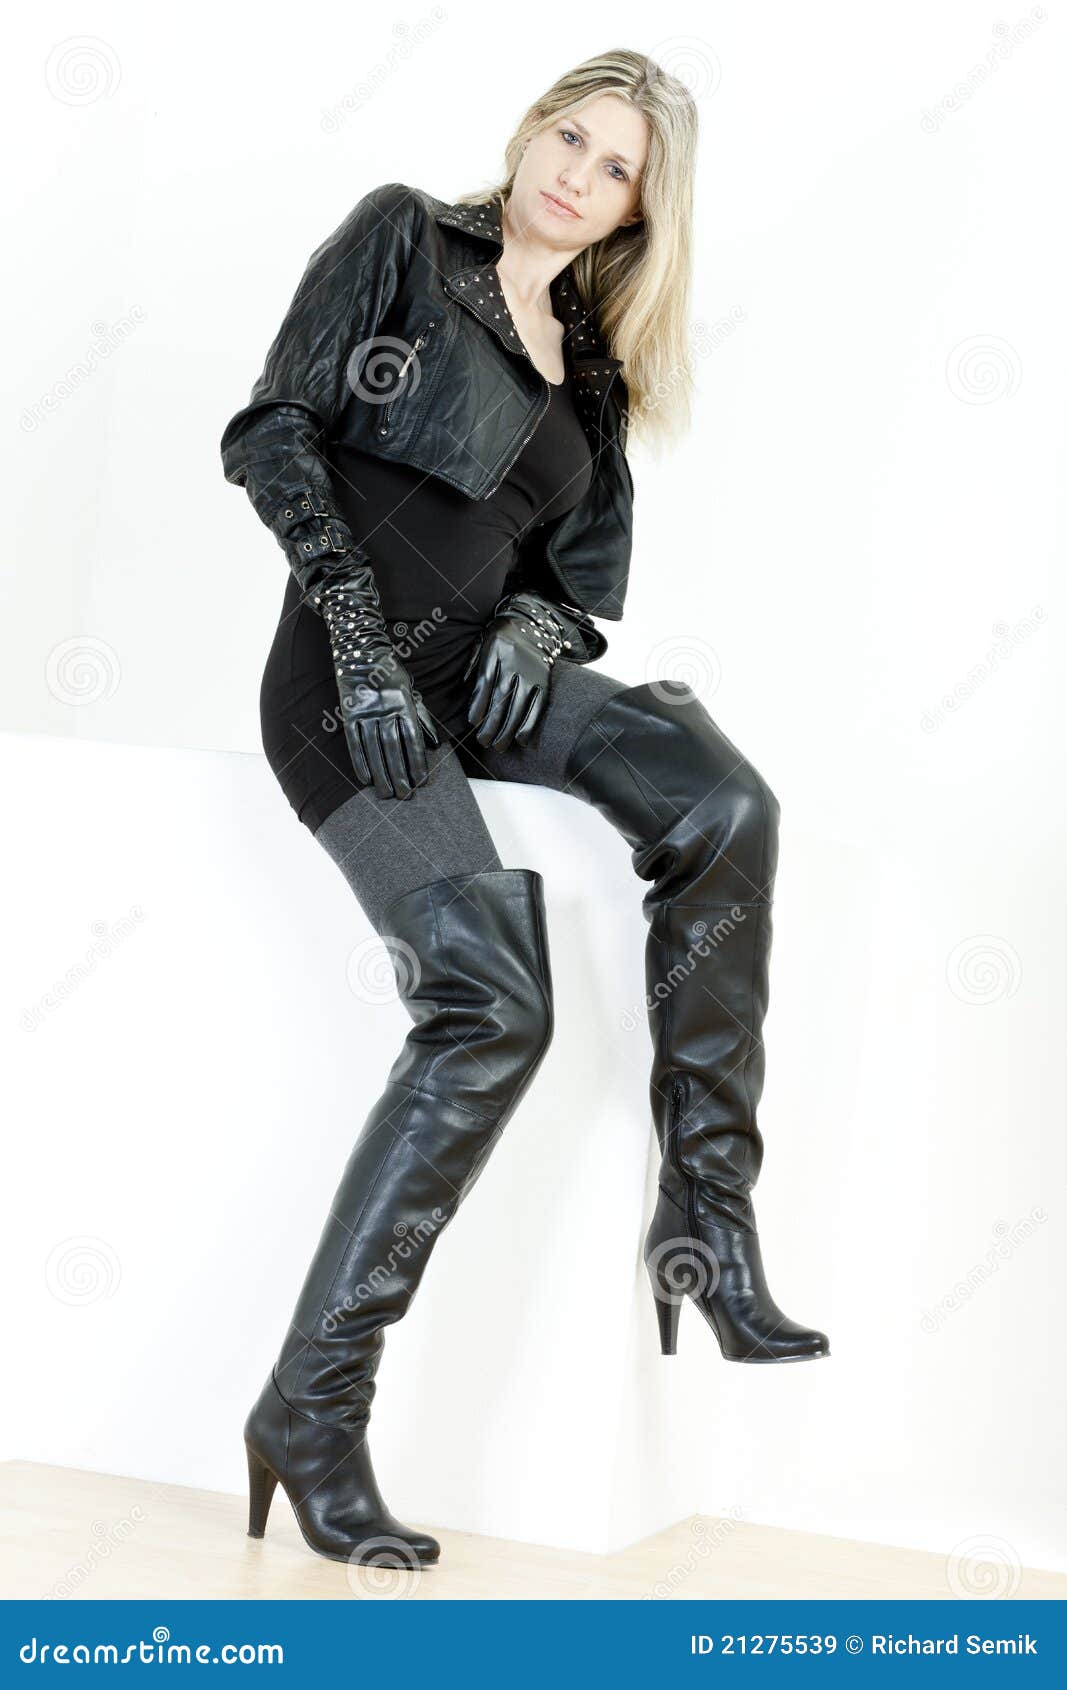 Woman Wearing Black Boots Royalty Free Stock Images - Image: 21275539